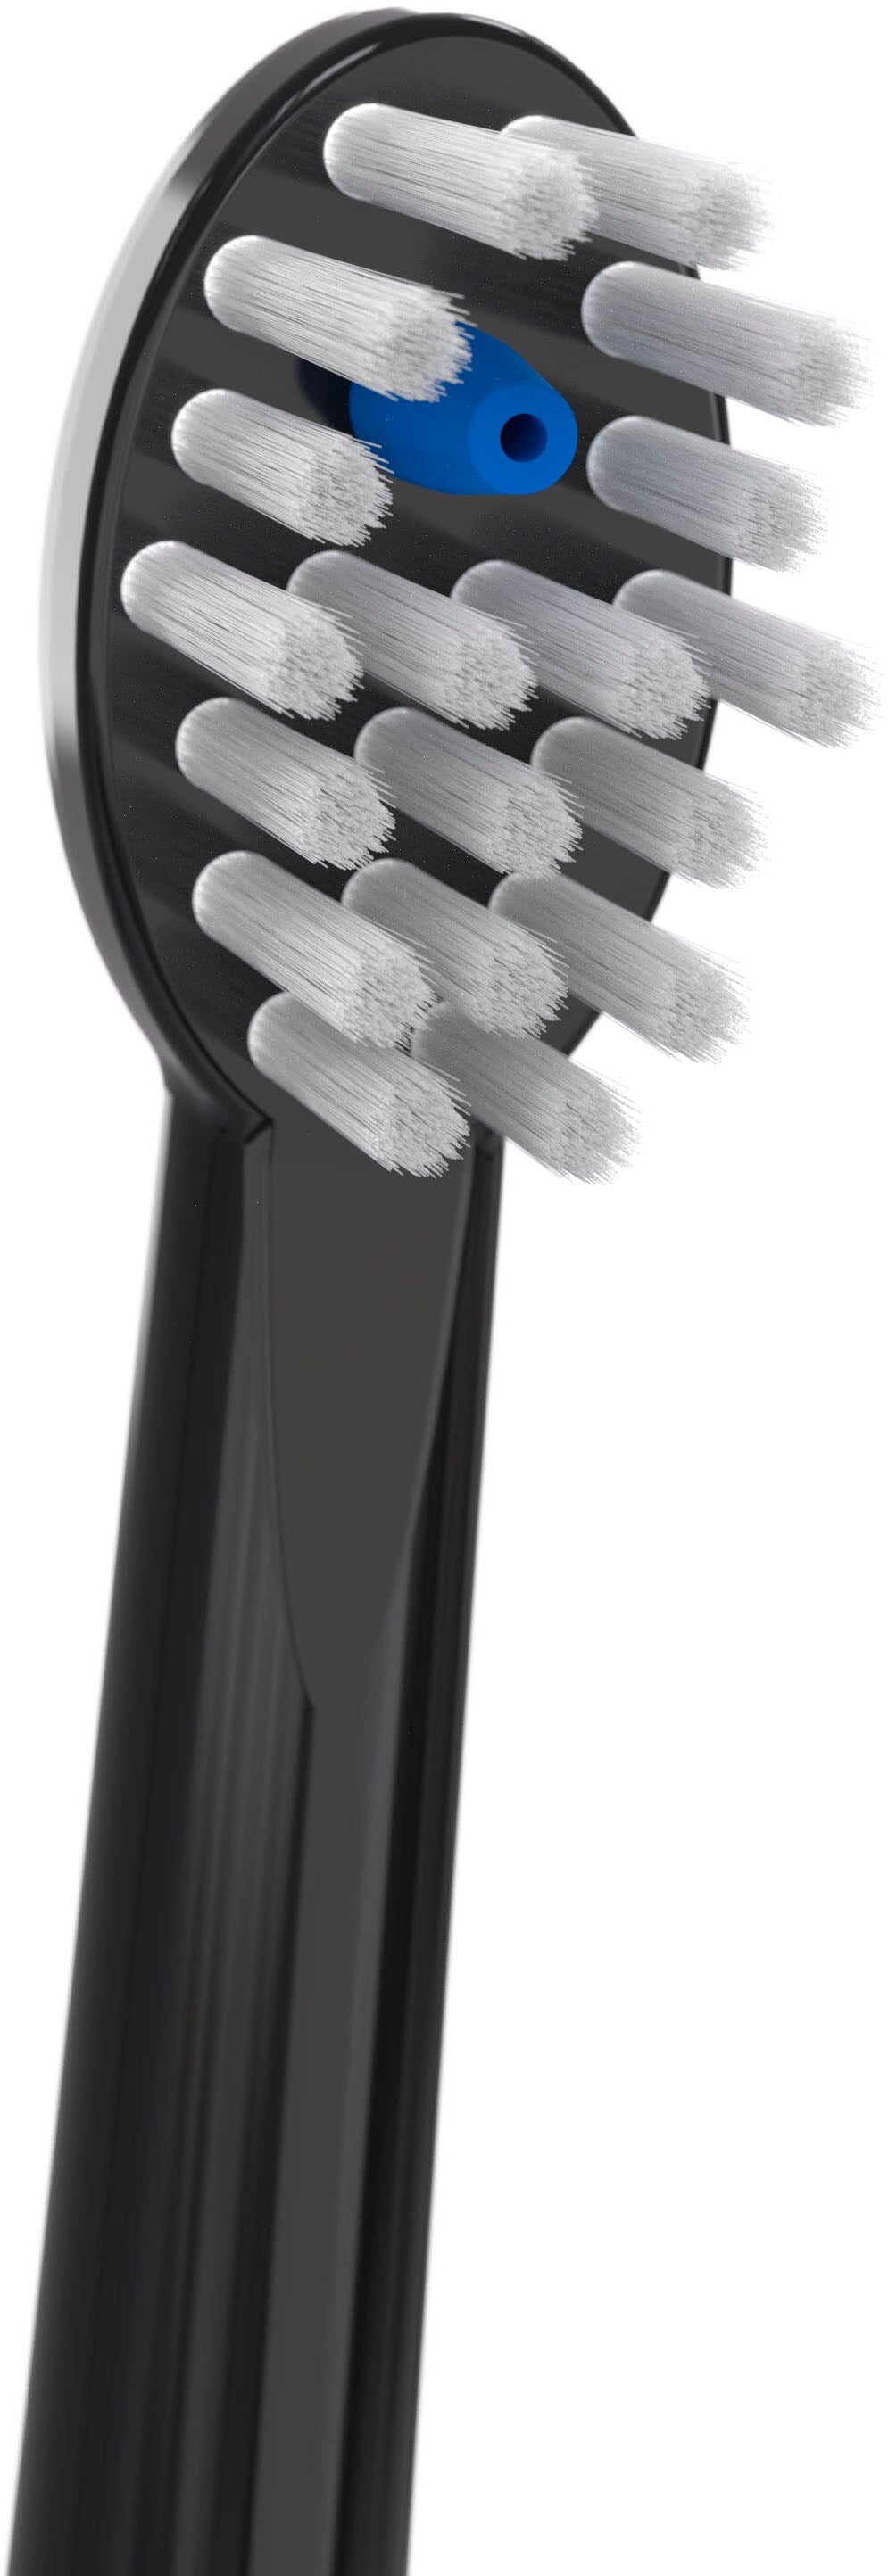 Waterpik - Sonic-Fusion Compact Replacement Flossing Brush Heads - Black_1